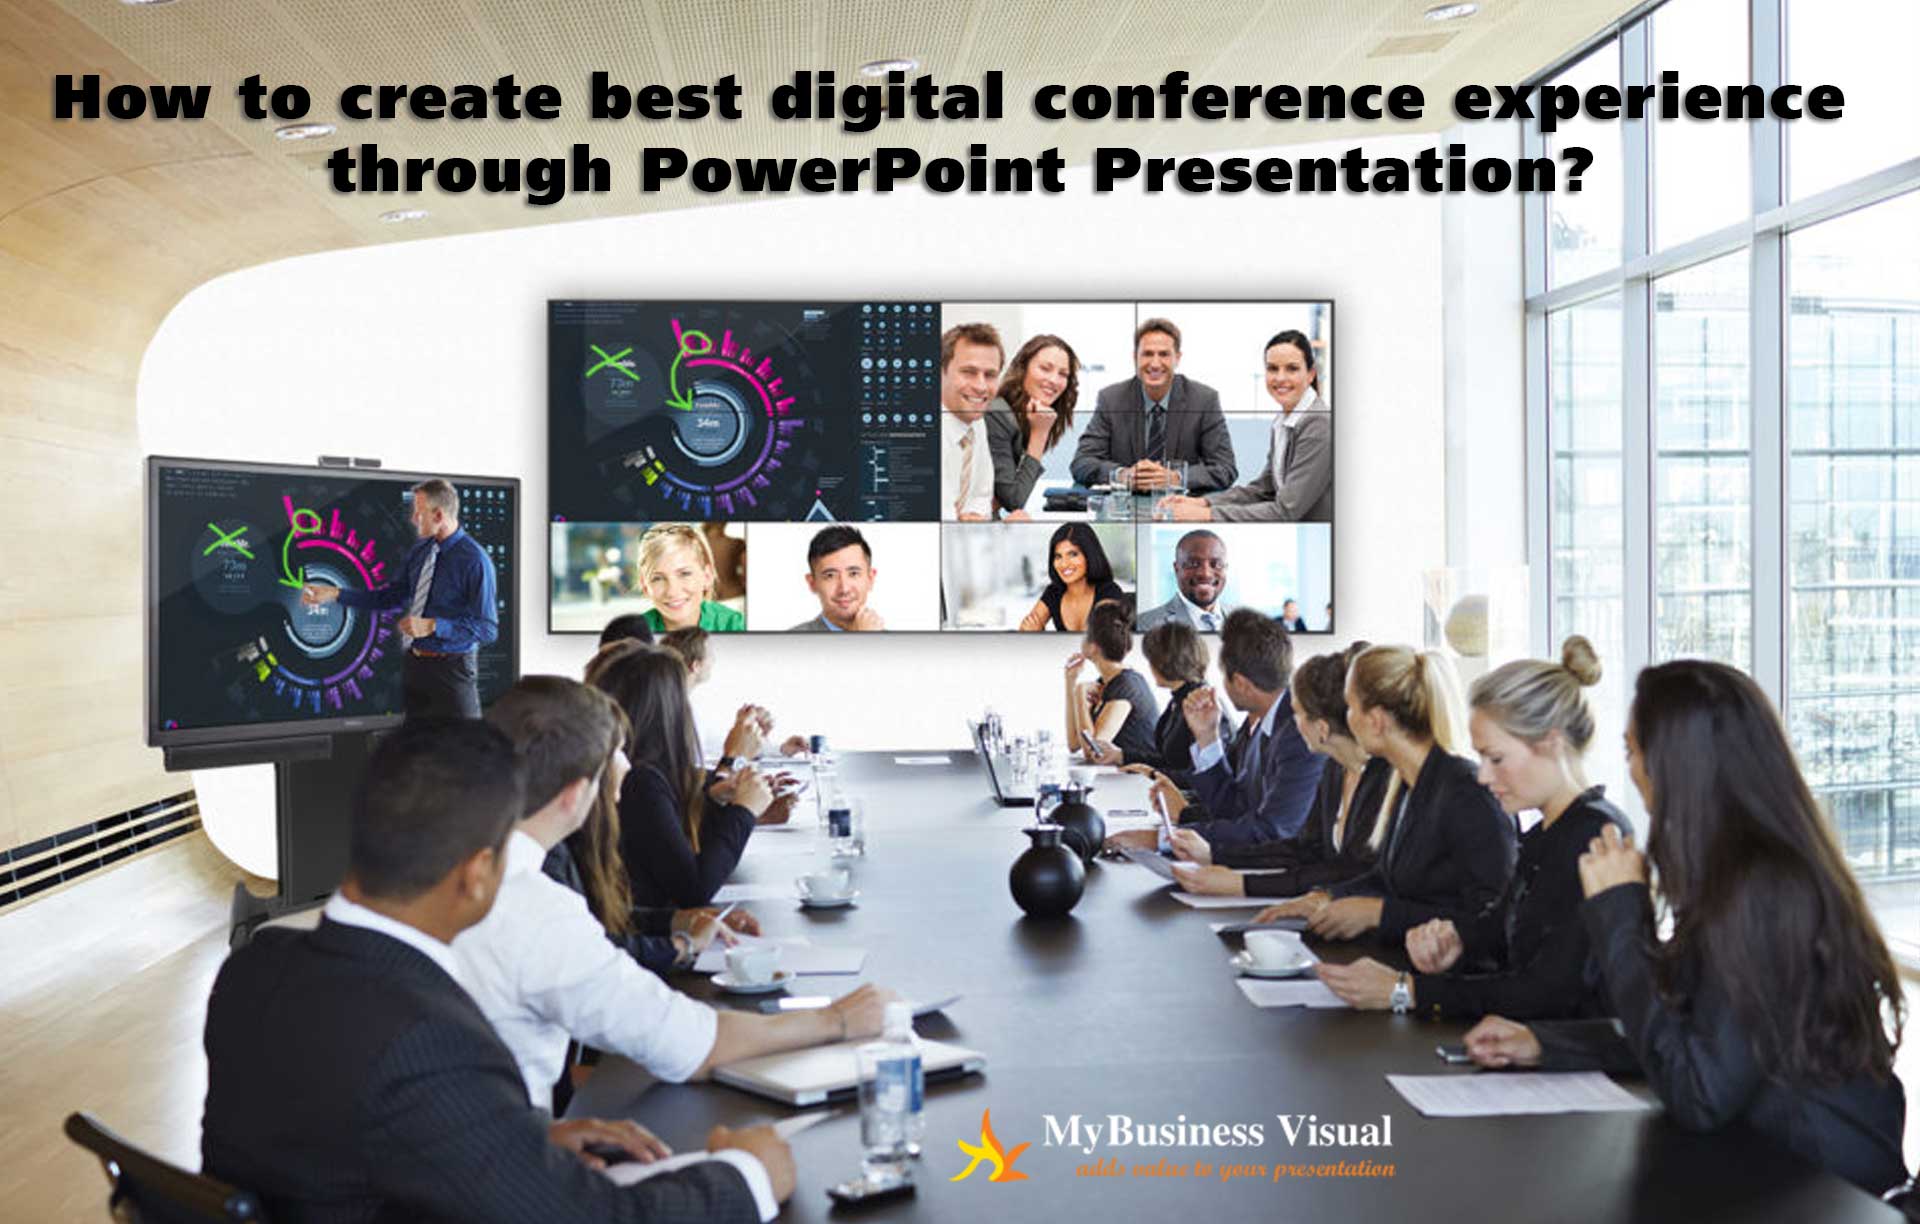 How to create best digital conference experience through PowerPoint Presentation?